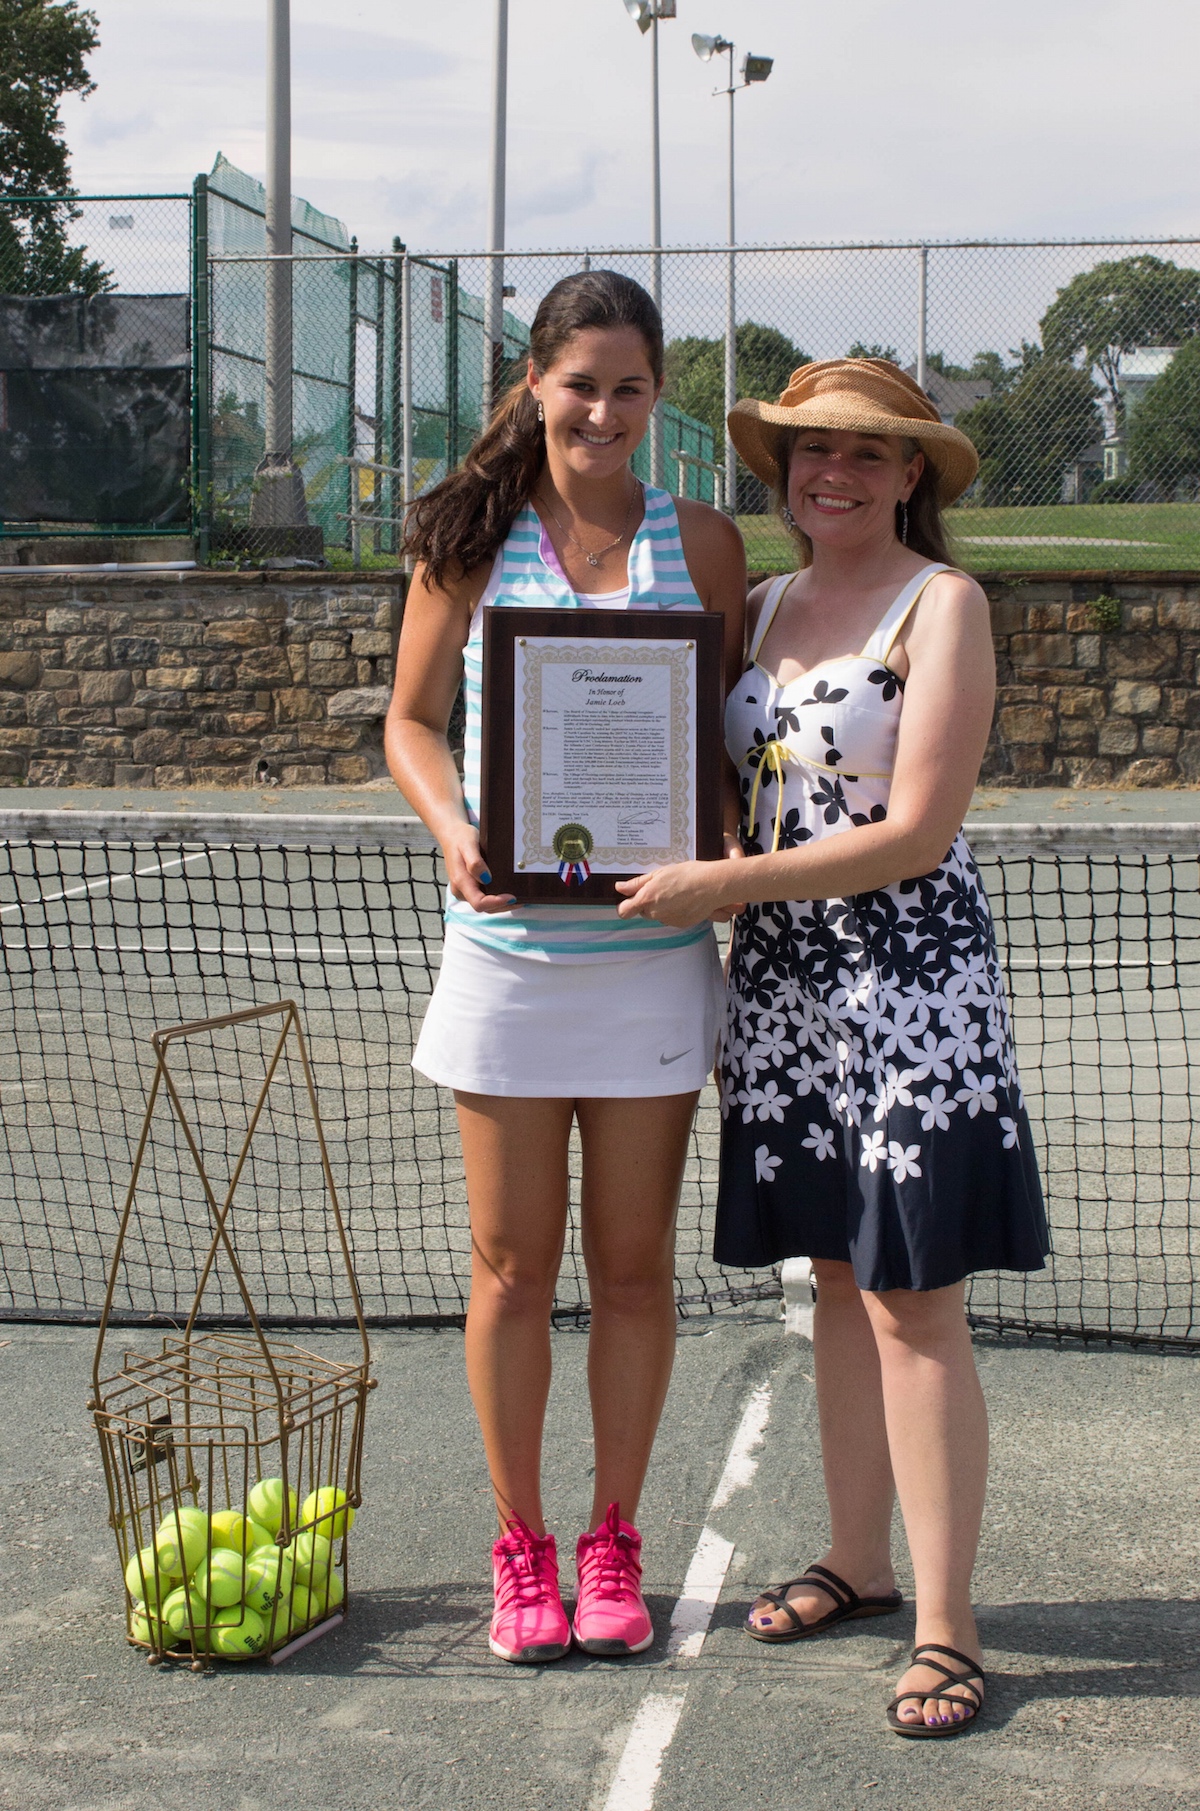 Ossining’s own Jamie Loeb, 2015 NCAA Women’s Singles Tennis National Champion, receives a special proclamation from Village of Ossining Mayor Victoria Gearity declaring August 3 as Jamie Loeb Day.